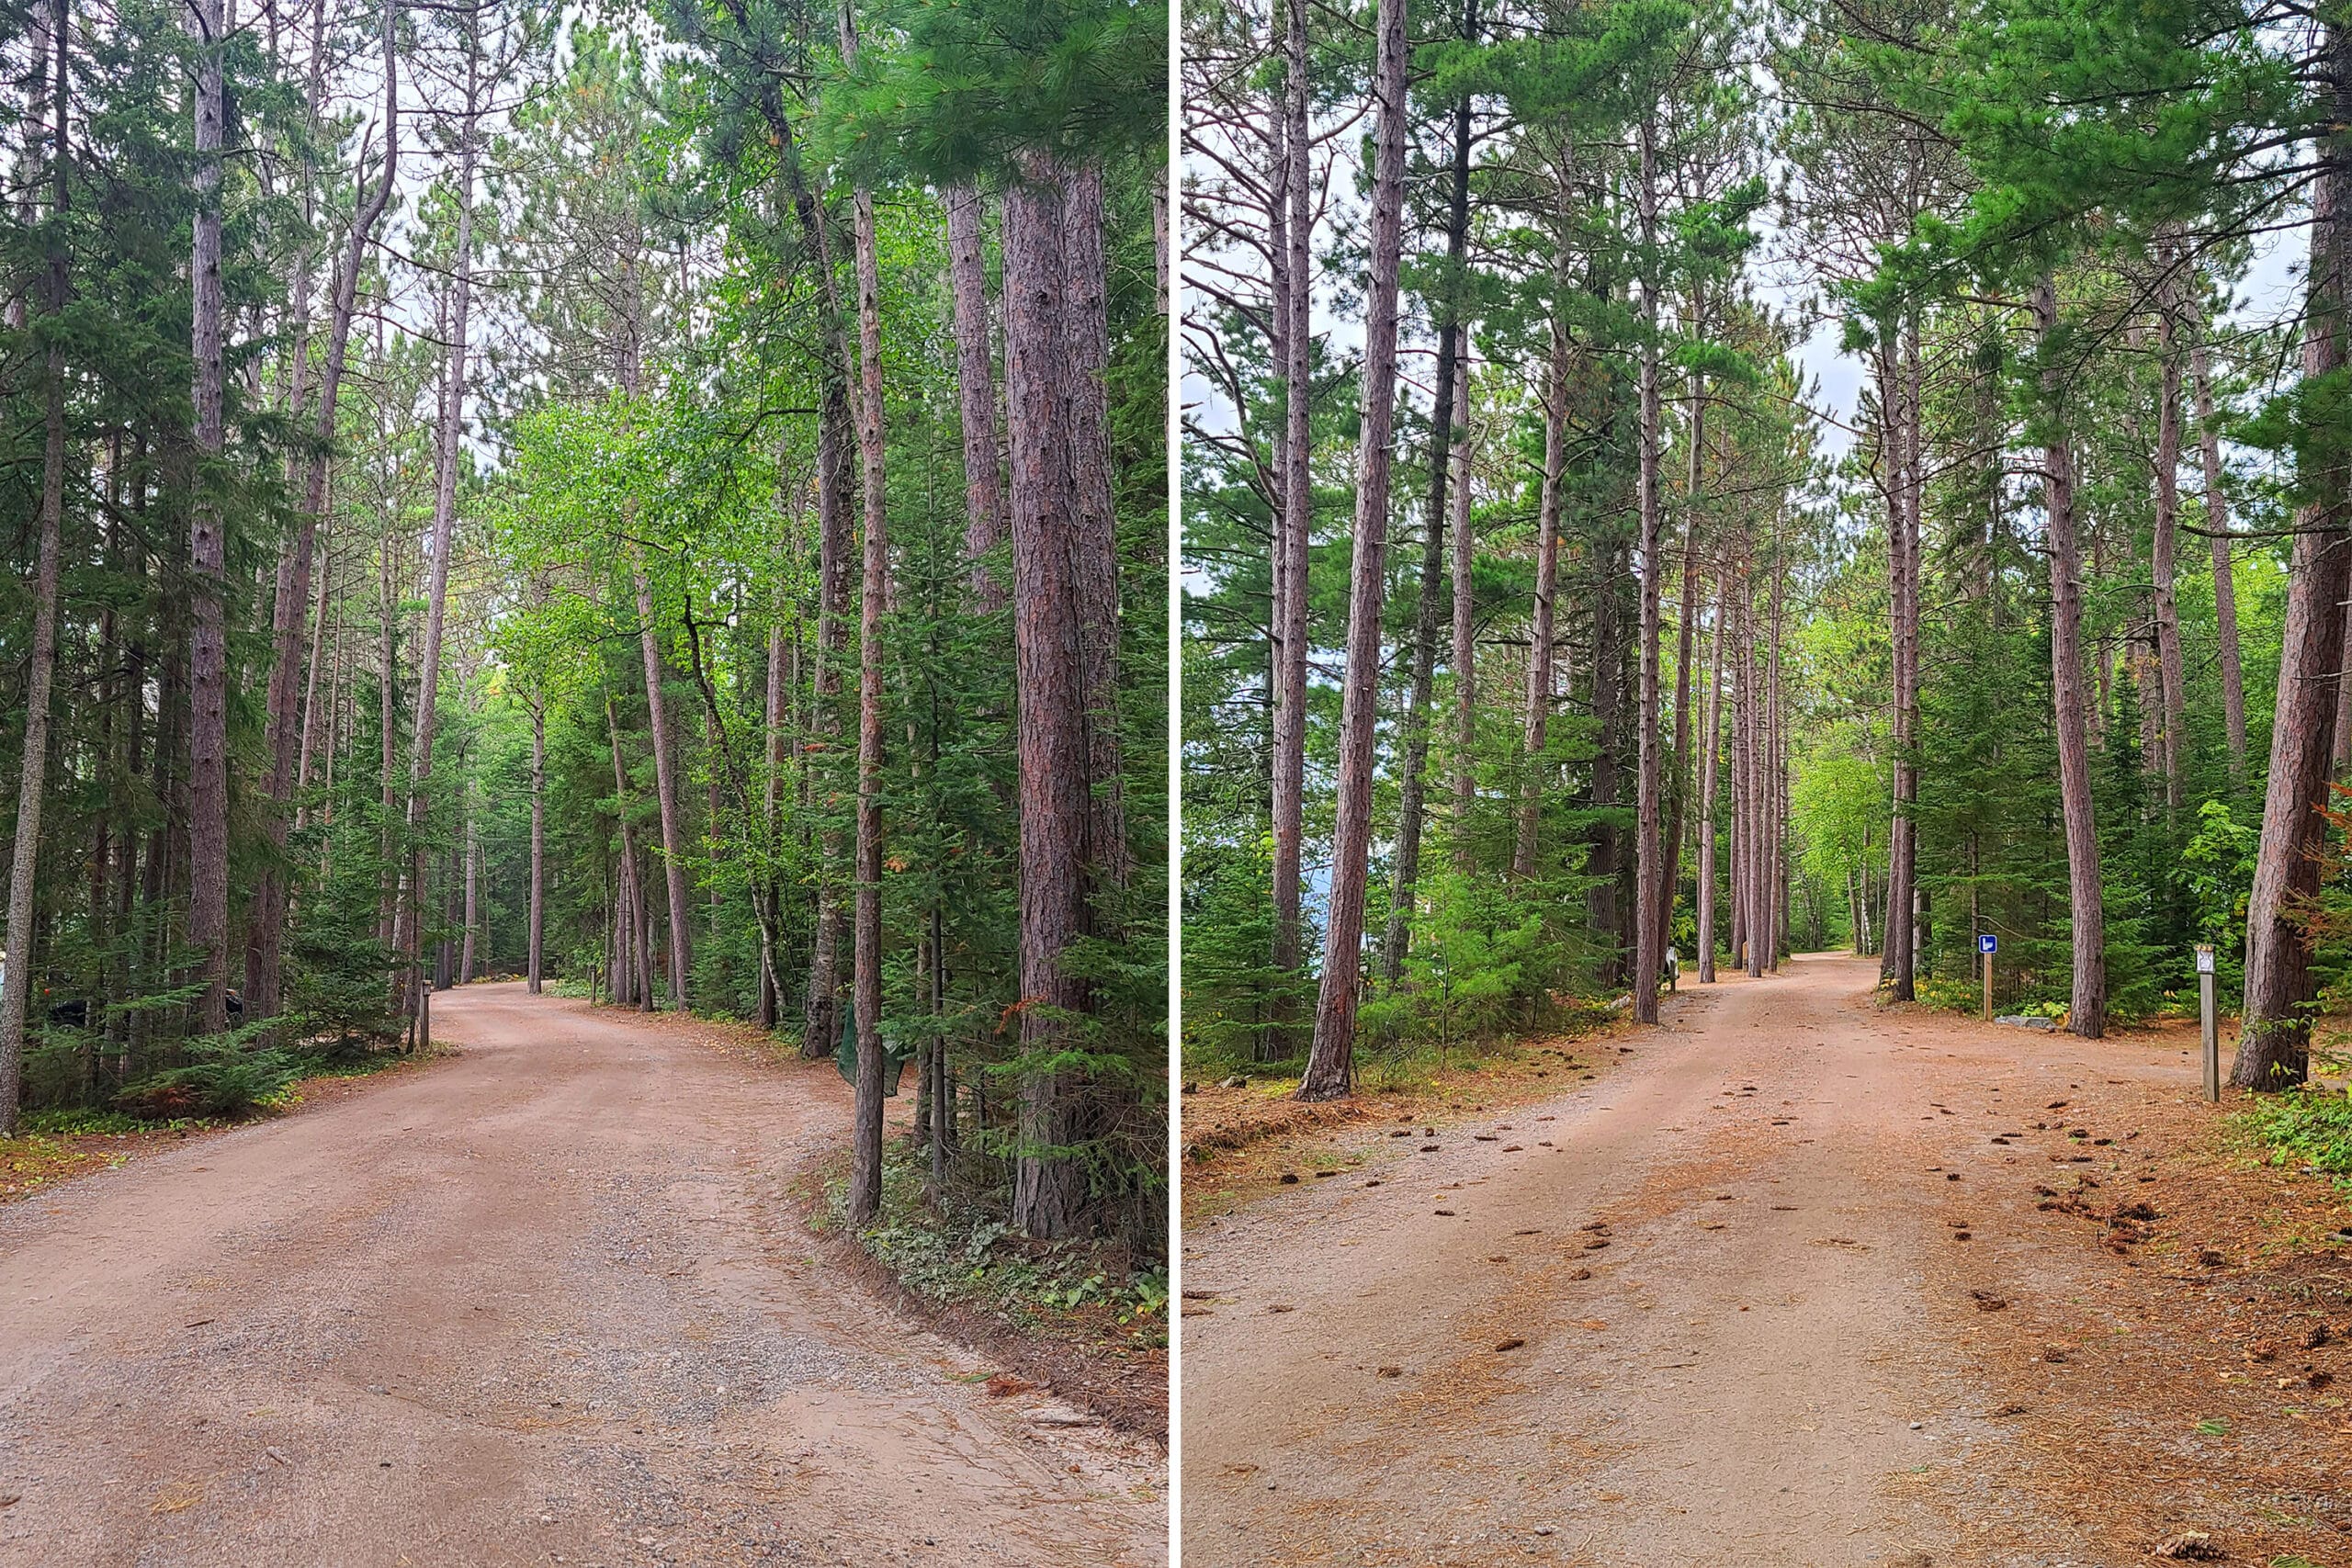 2 part image showing narrow packed campground road, flanked by campsites and tall pine trees.